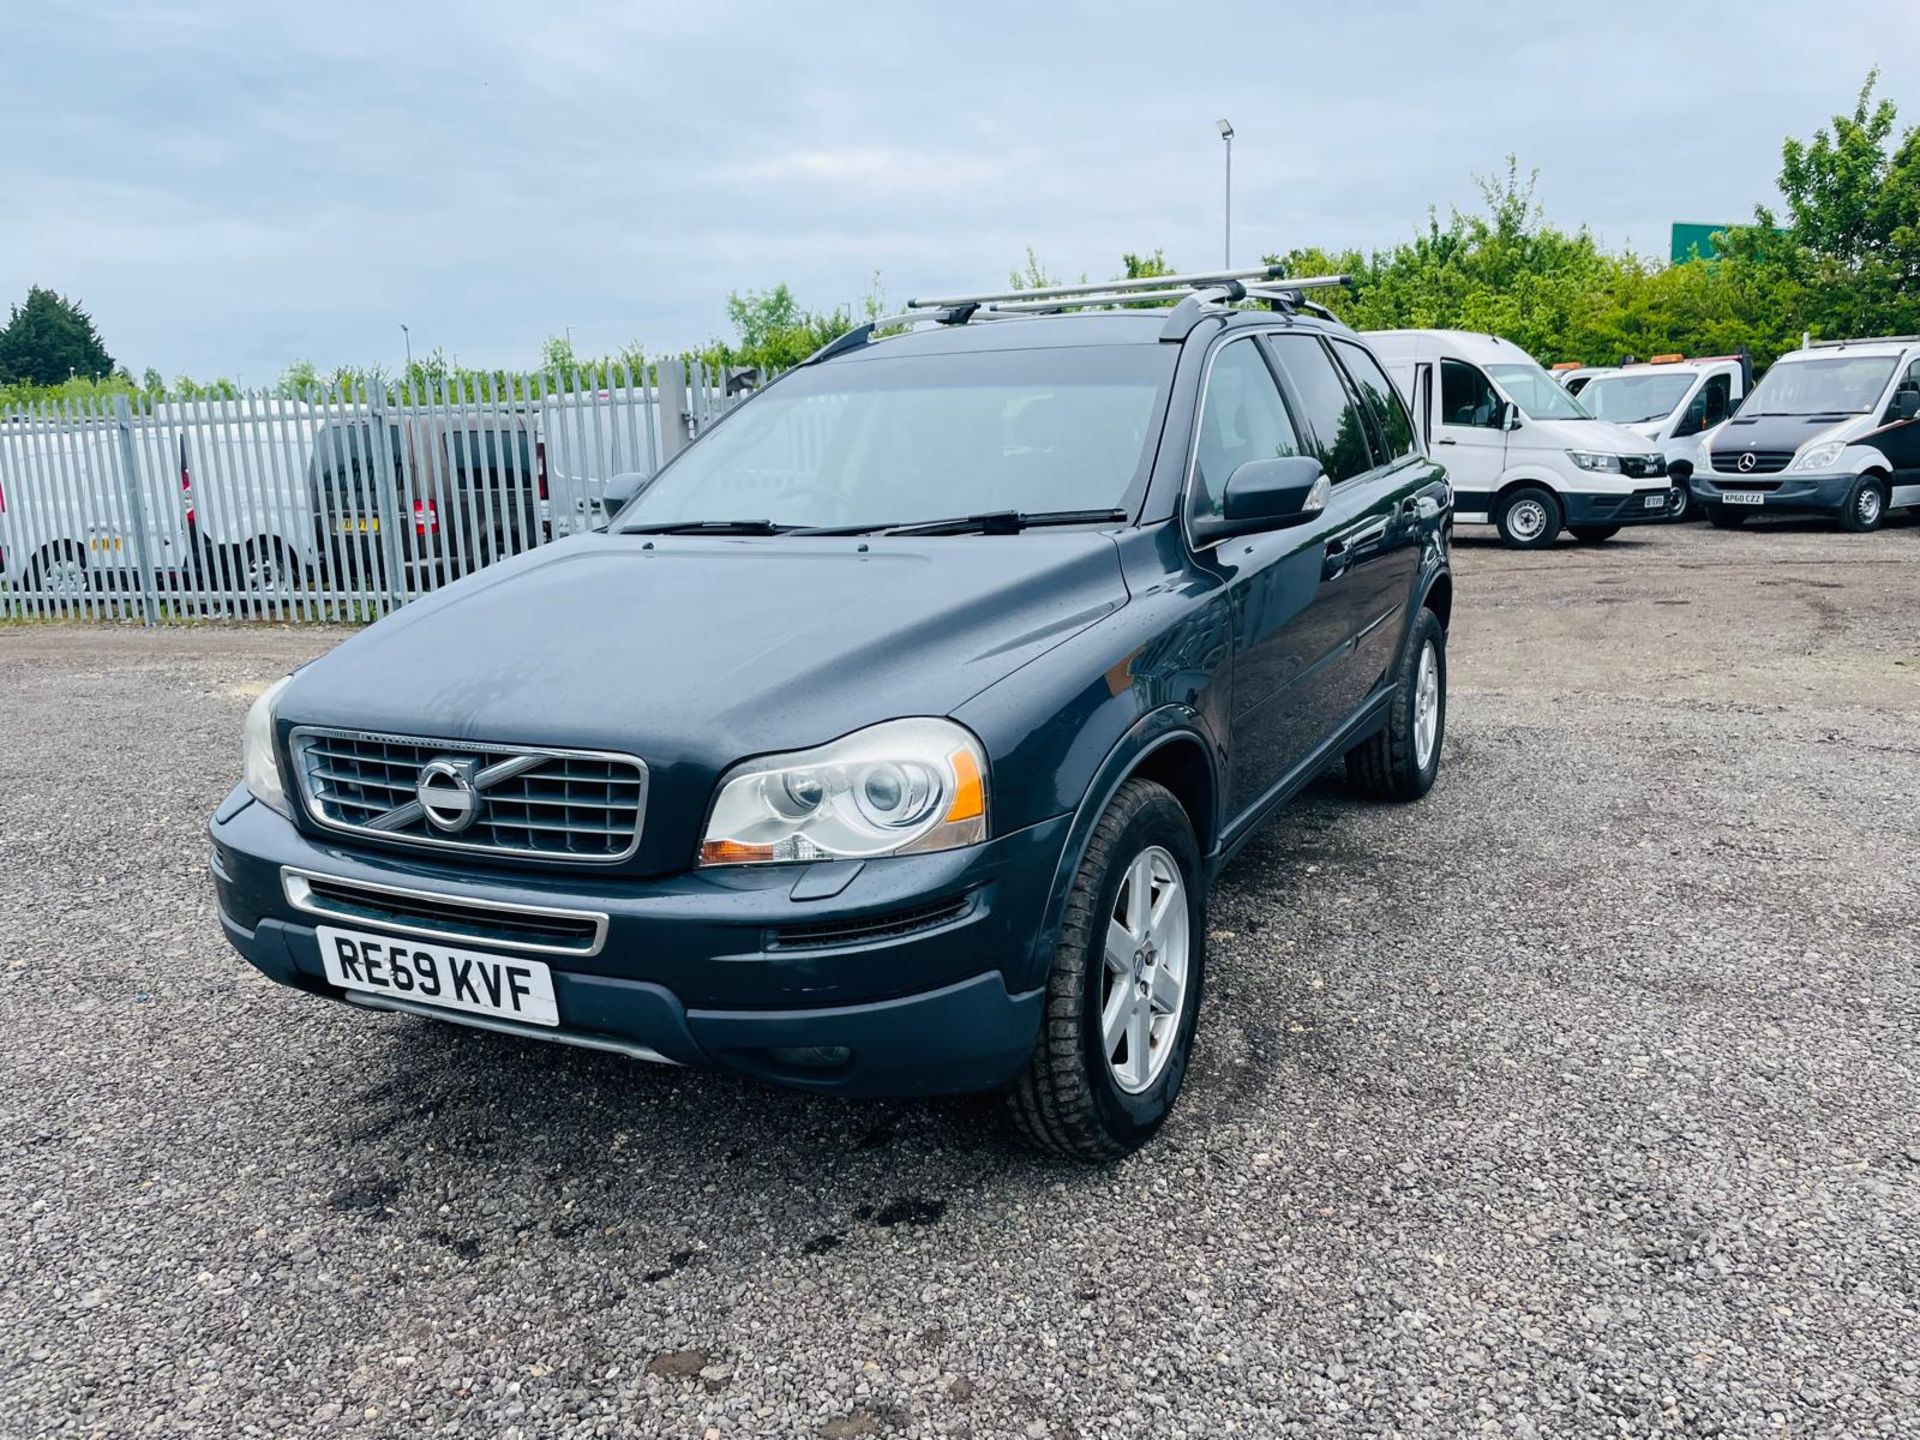 Volvo XC90 D5 185 Active 2.4 2009 '59 Reg' -7 Seats-Air Conditioning-Power Mirrors-Automatic-No Vat - Image 3 of 34